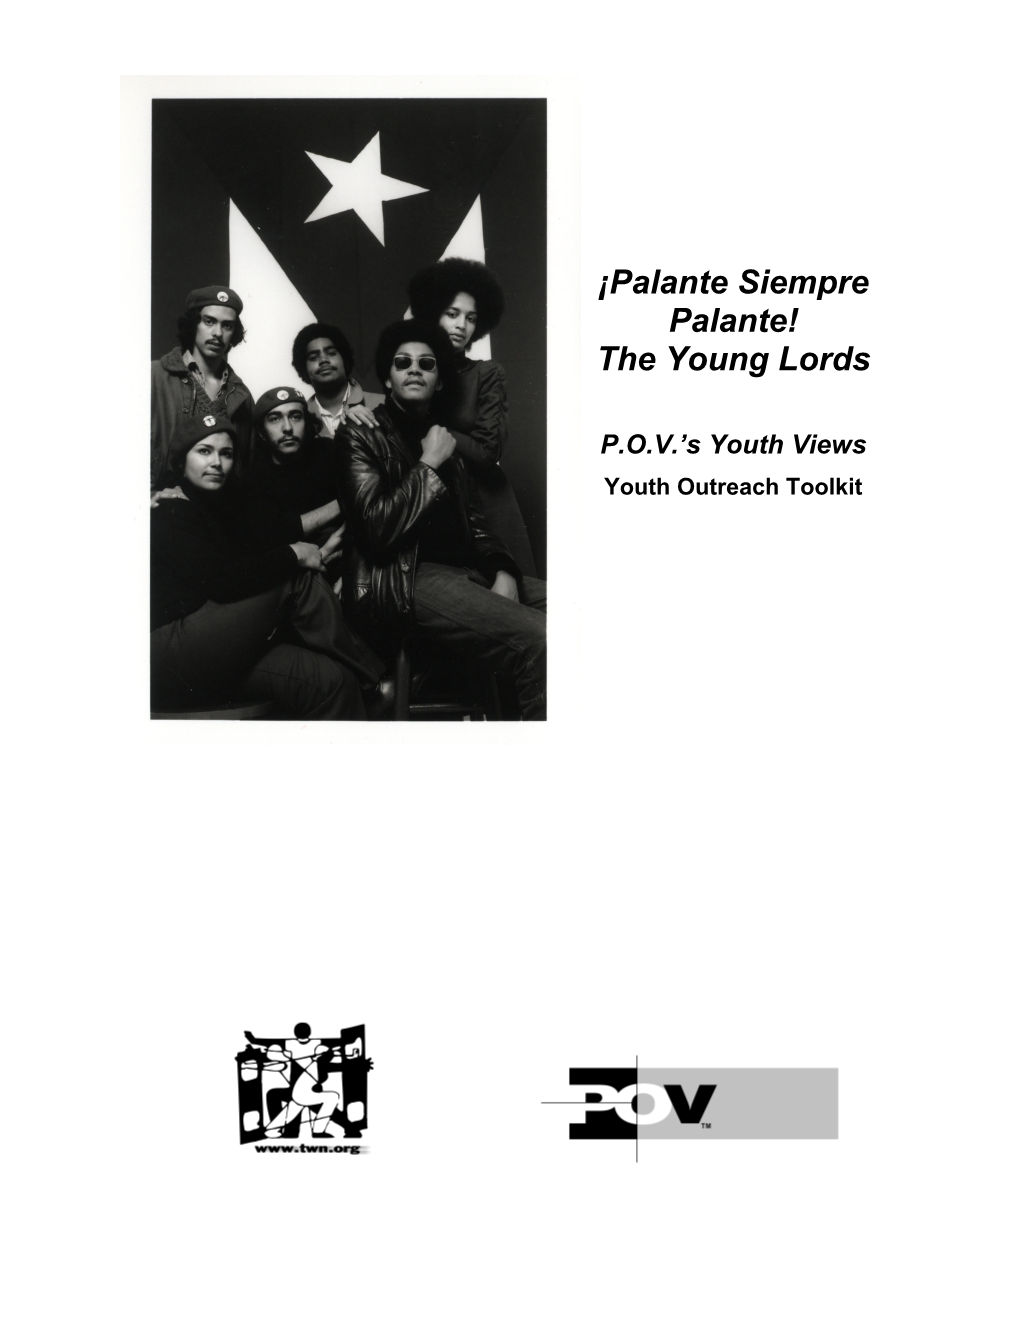 ¡Palante Siempre Palante! the Young Lords